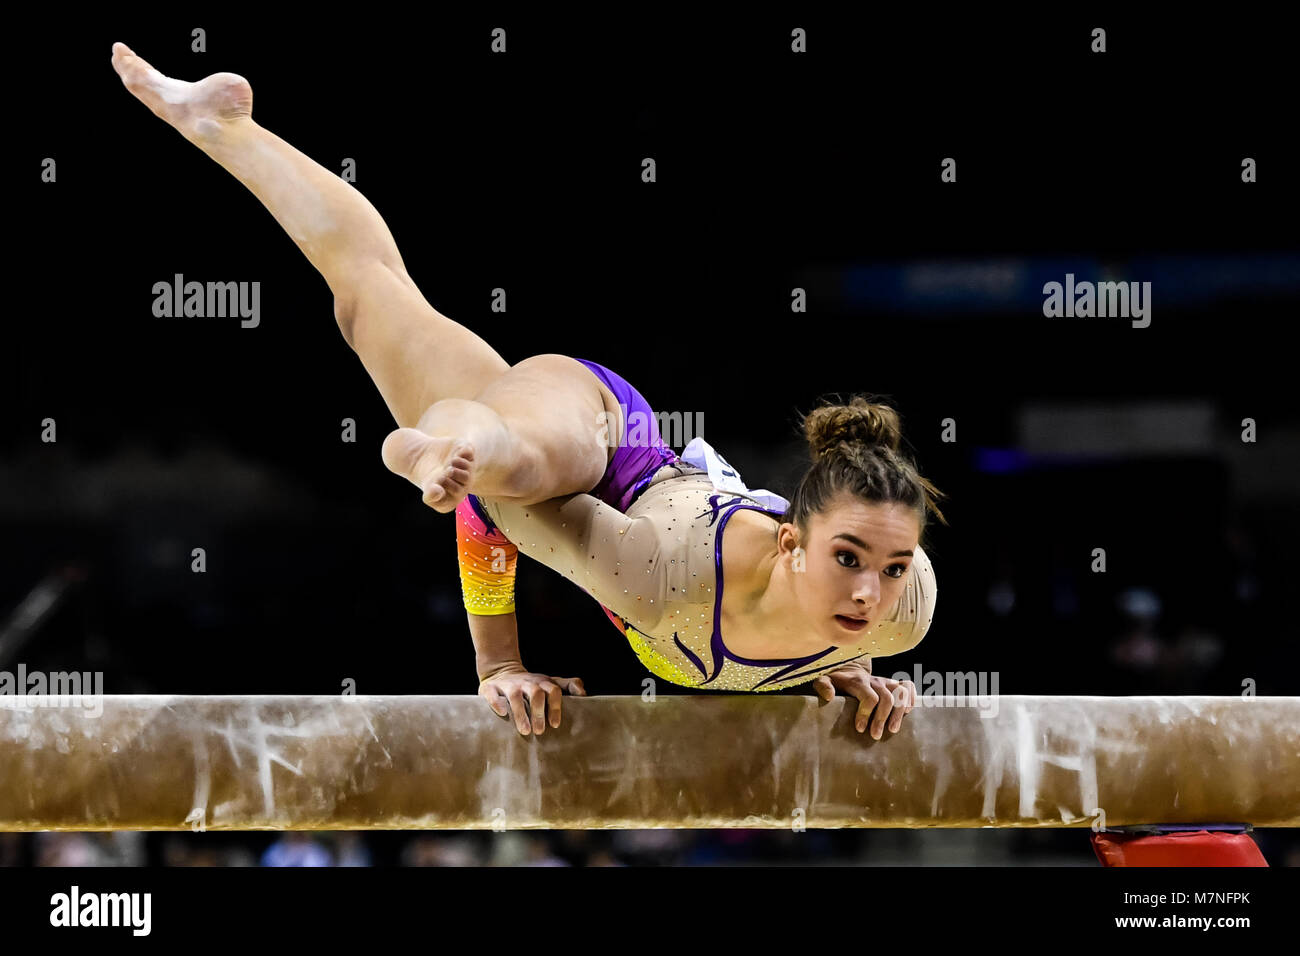 Echo Arena, Liverpool, UK. 11th Mar, 2018. Amelia Knight competes on the Balance Beam during the WAG Senior Apparatus Final/MAG Masters of the 2018 Gymnastics British Championships at Echo Arena on Sunday, 11 March 2018. LIVERPOOL ENGLAND. Credit: Taka G Wu Credit: Taka Wu/Alamy Live News Stock Photo